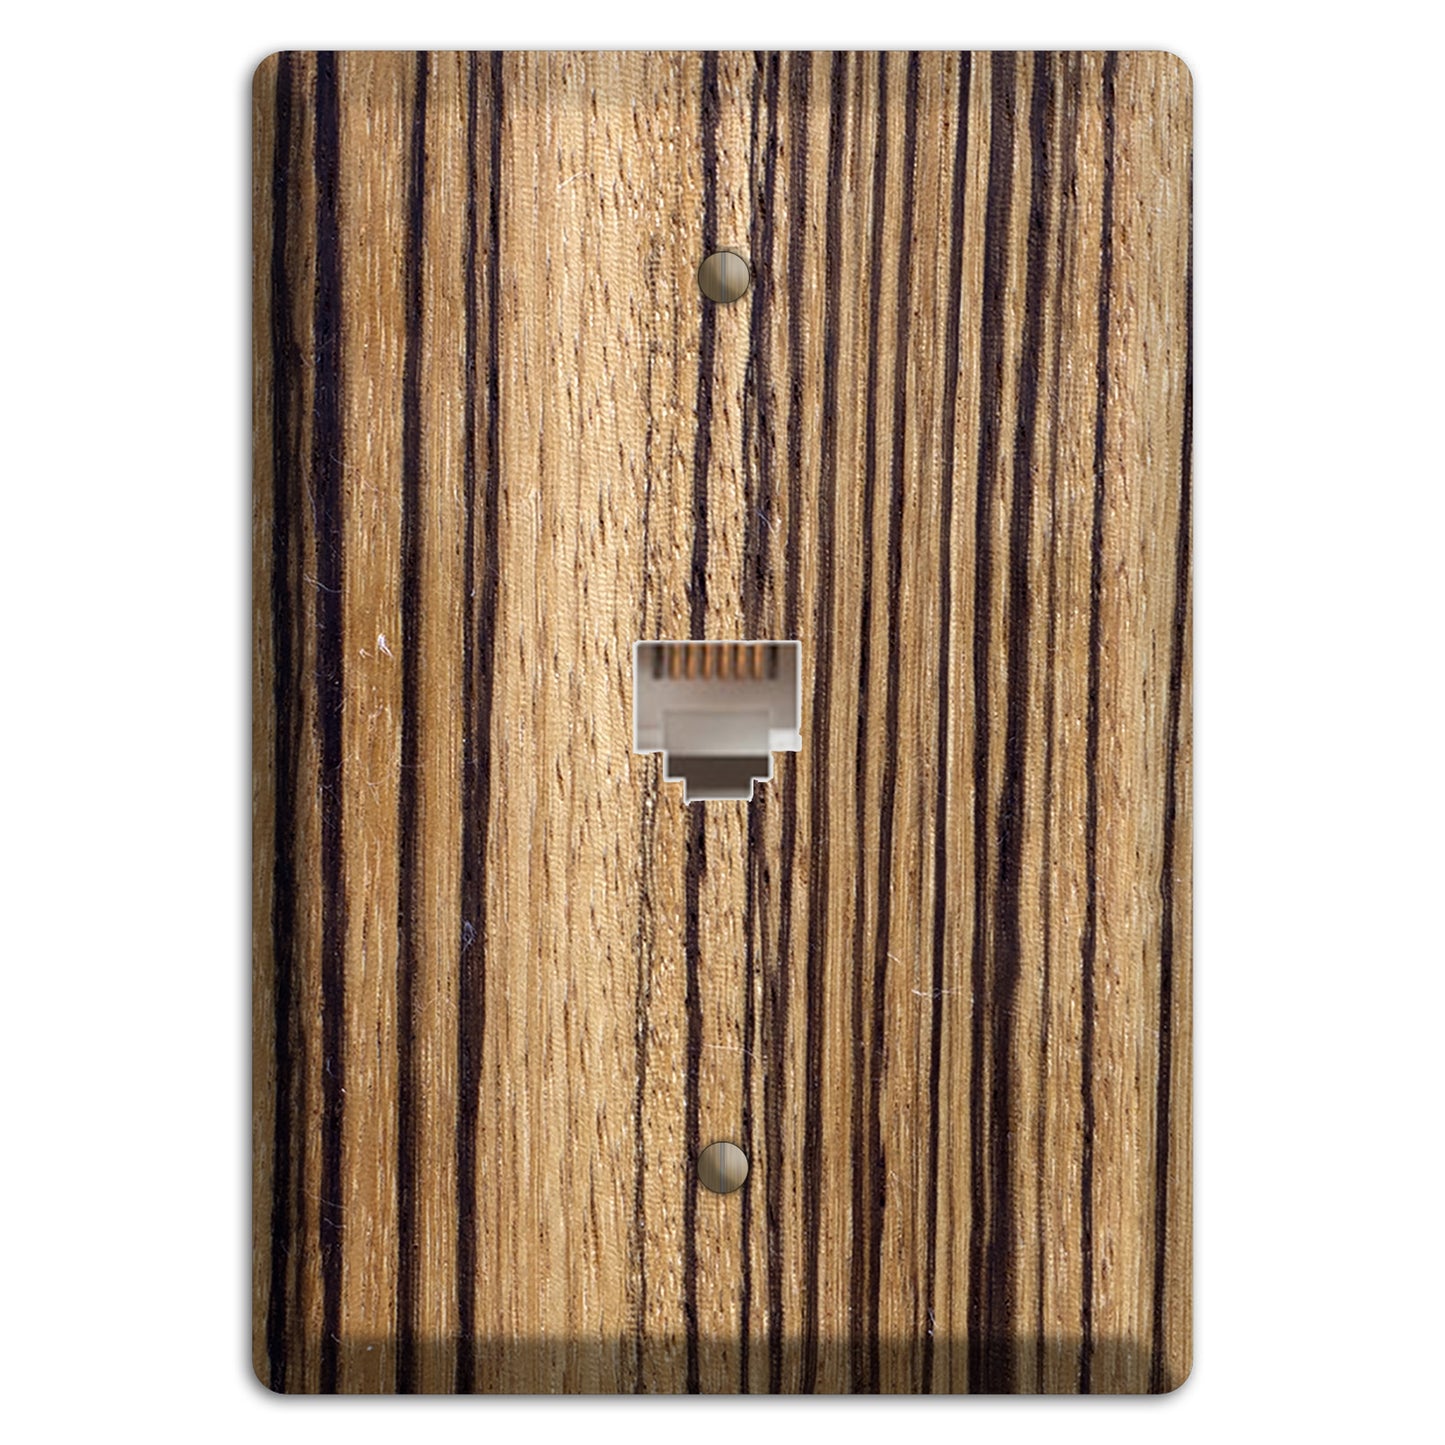 Zebrawood Wood Duplex Outlet / Receptacle Cover Plate